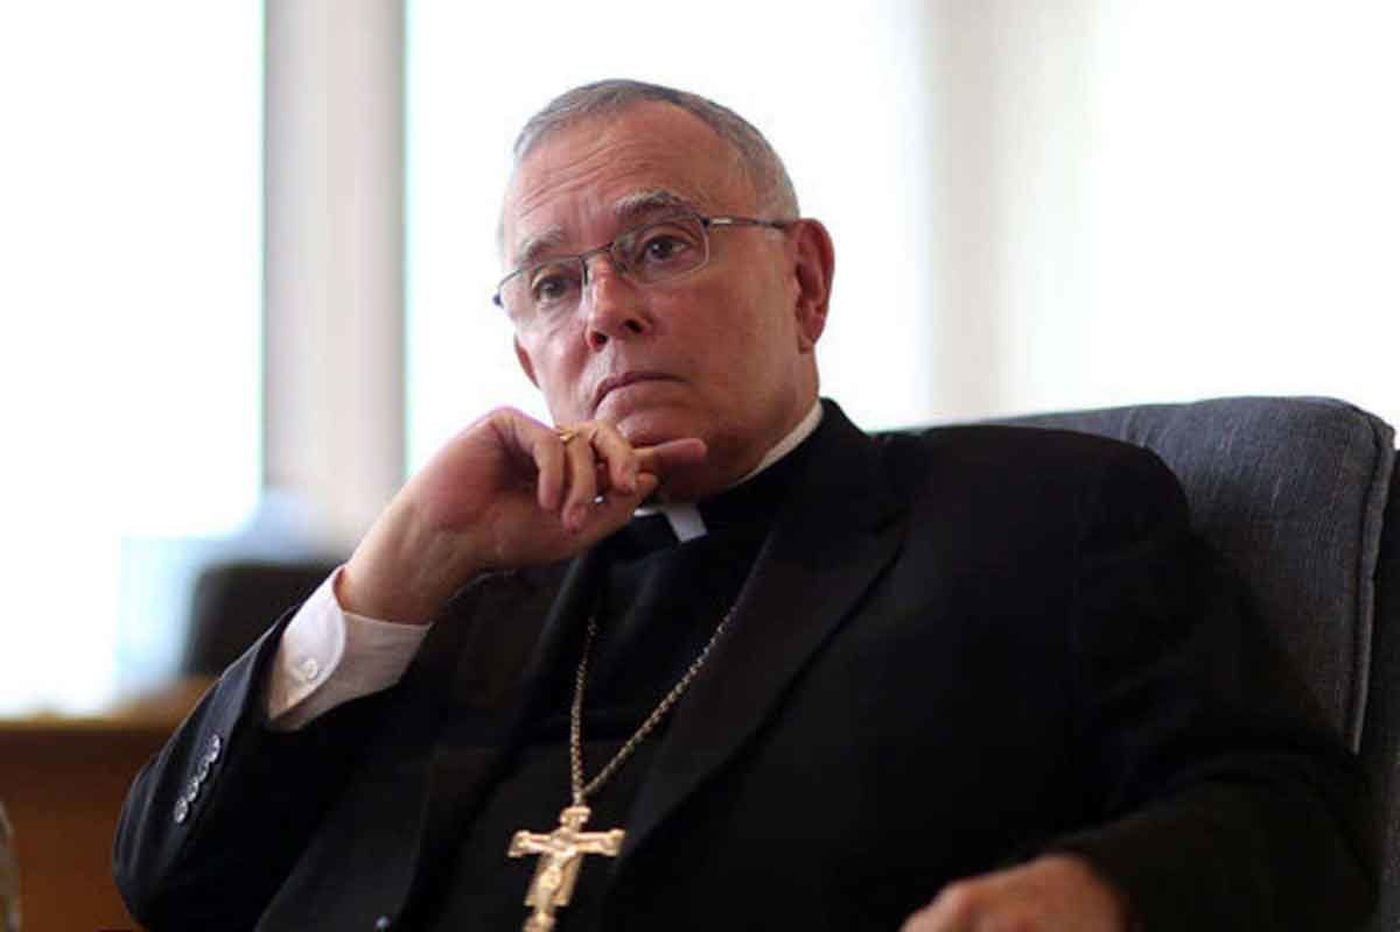 Archbishop Charles Chaput Media Coverage Of Church Sex Abuse Scandal Is Unbalanced